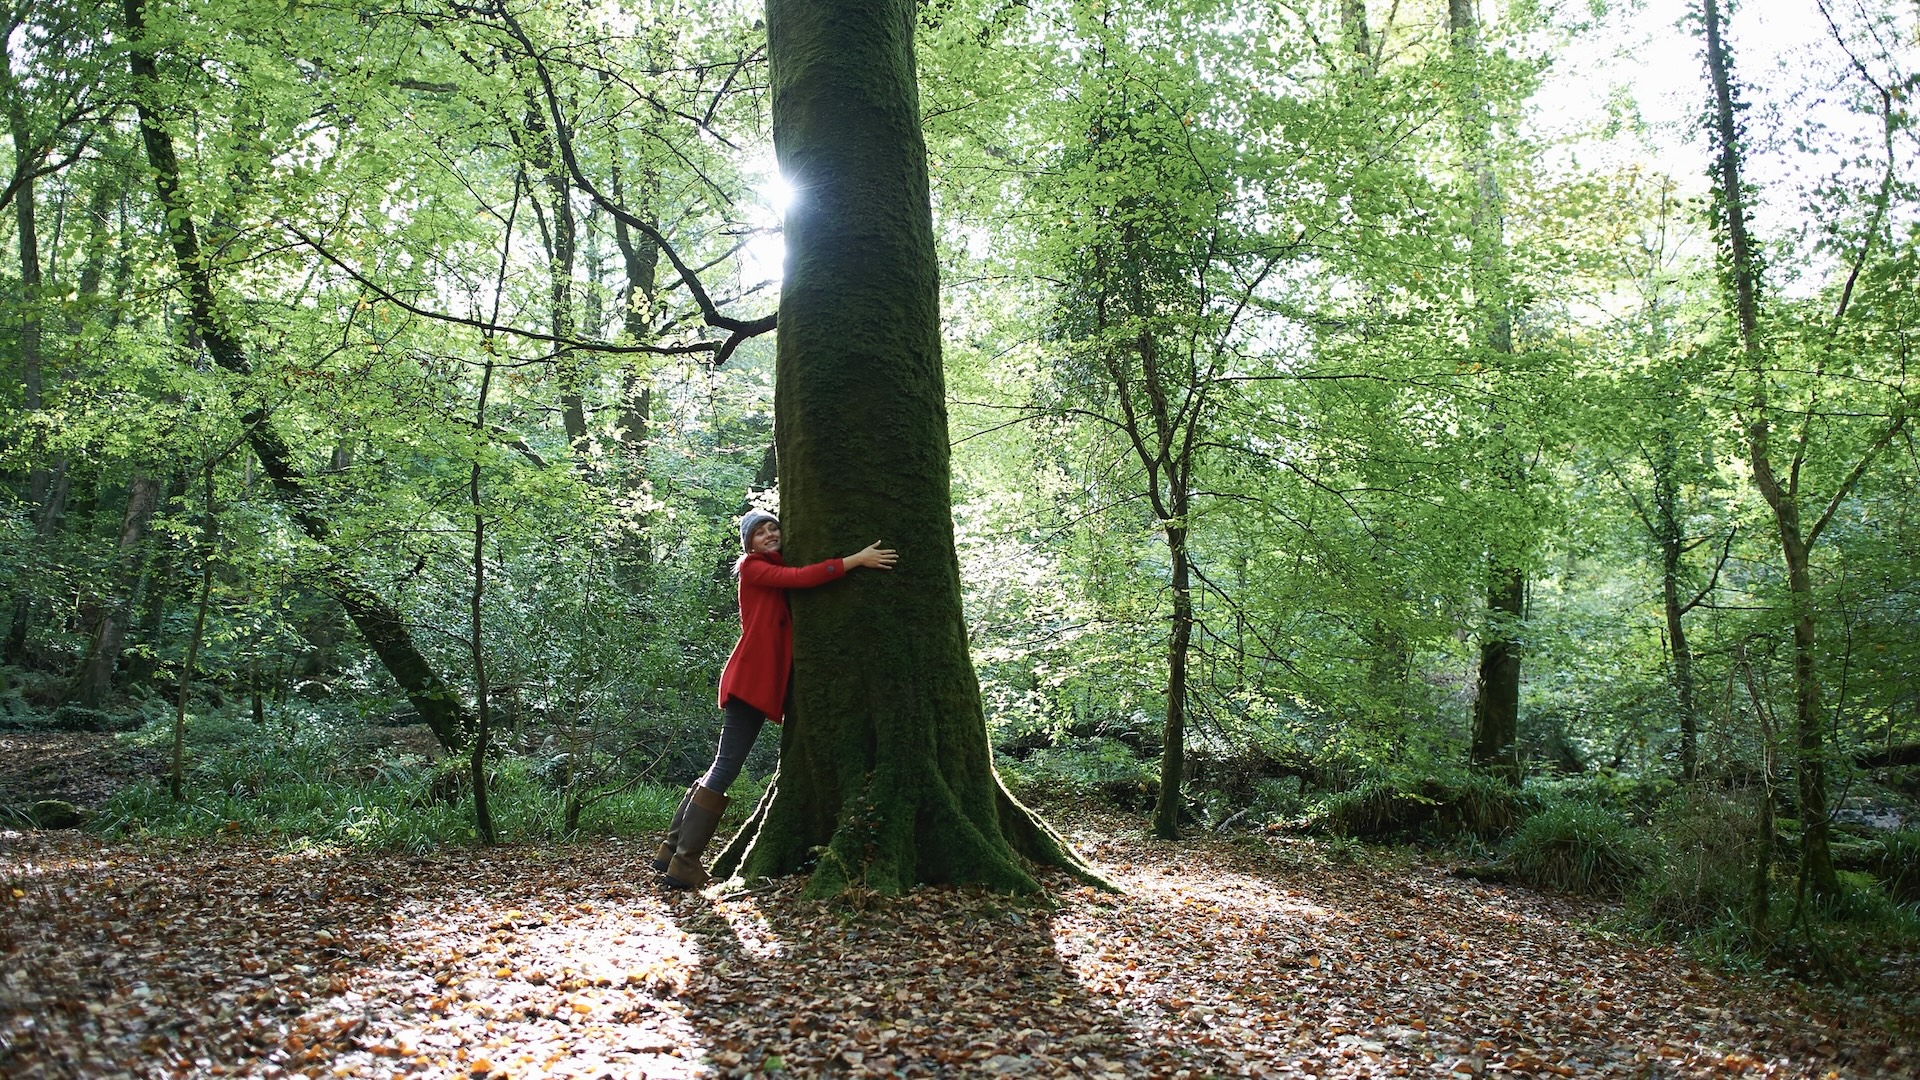 A person hugging a tree in a forest